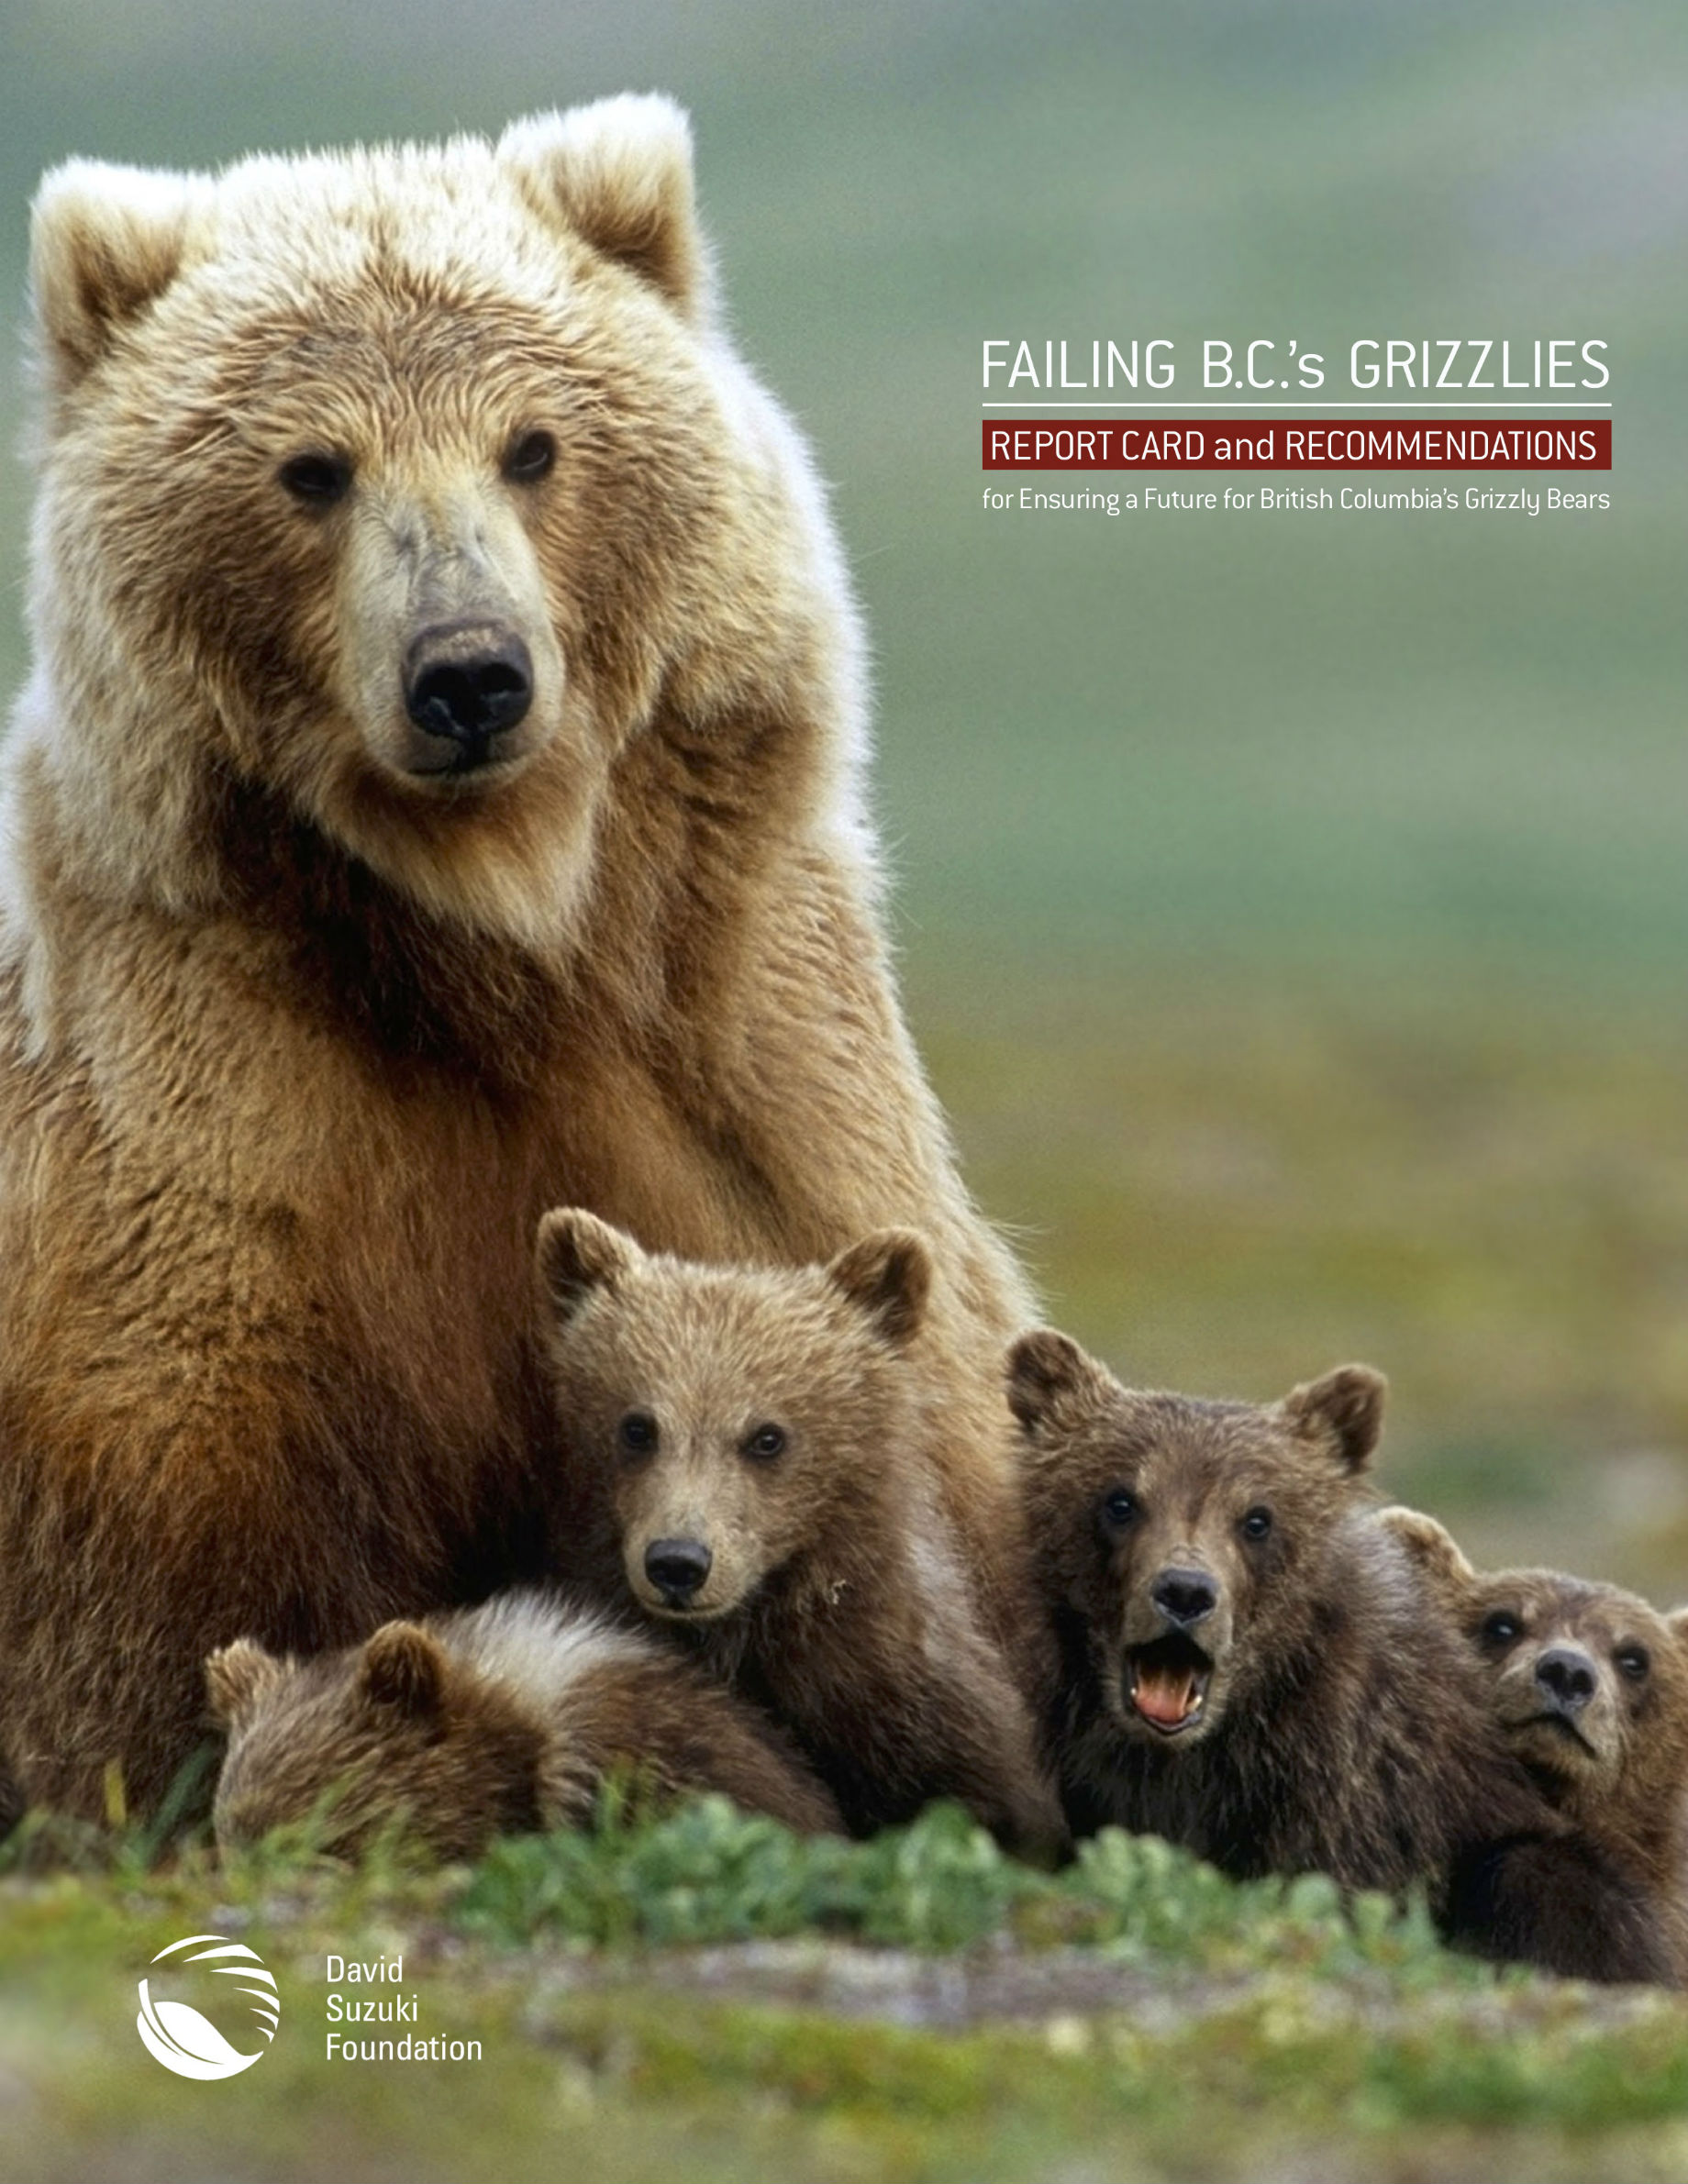 Failing B.C.’s Grizzlies: Report Card and Recommendations for Ensuring a Future for British Columbia’s Grizzly Bears